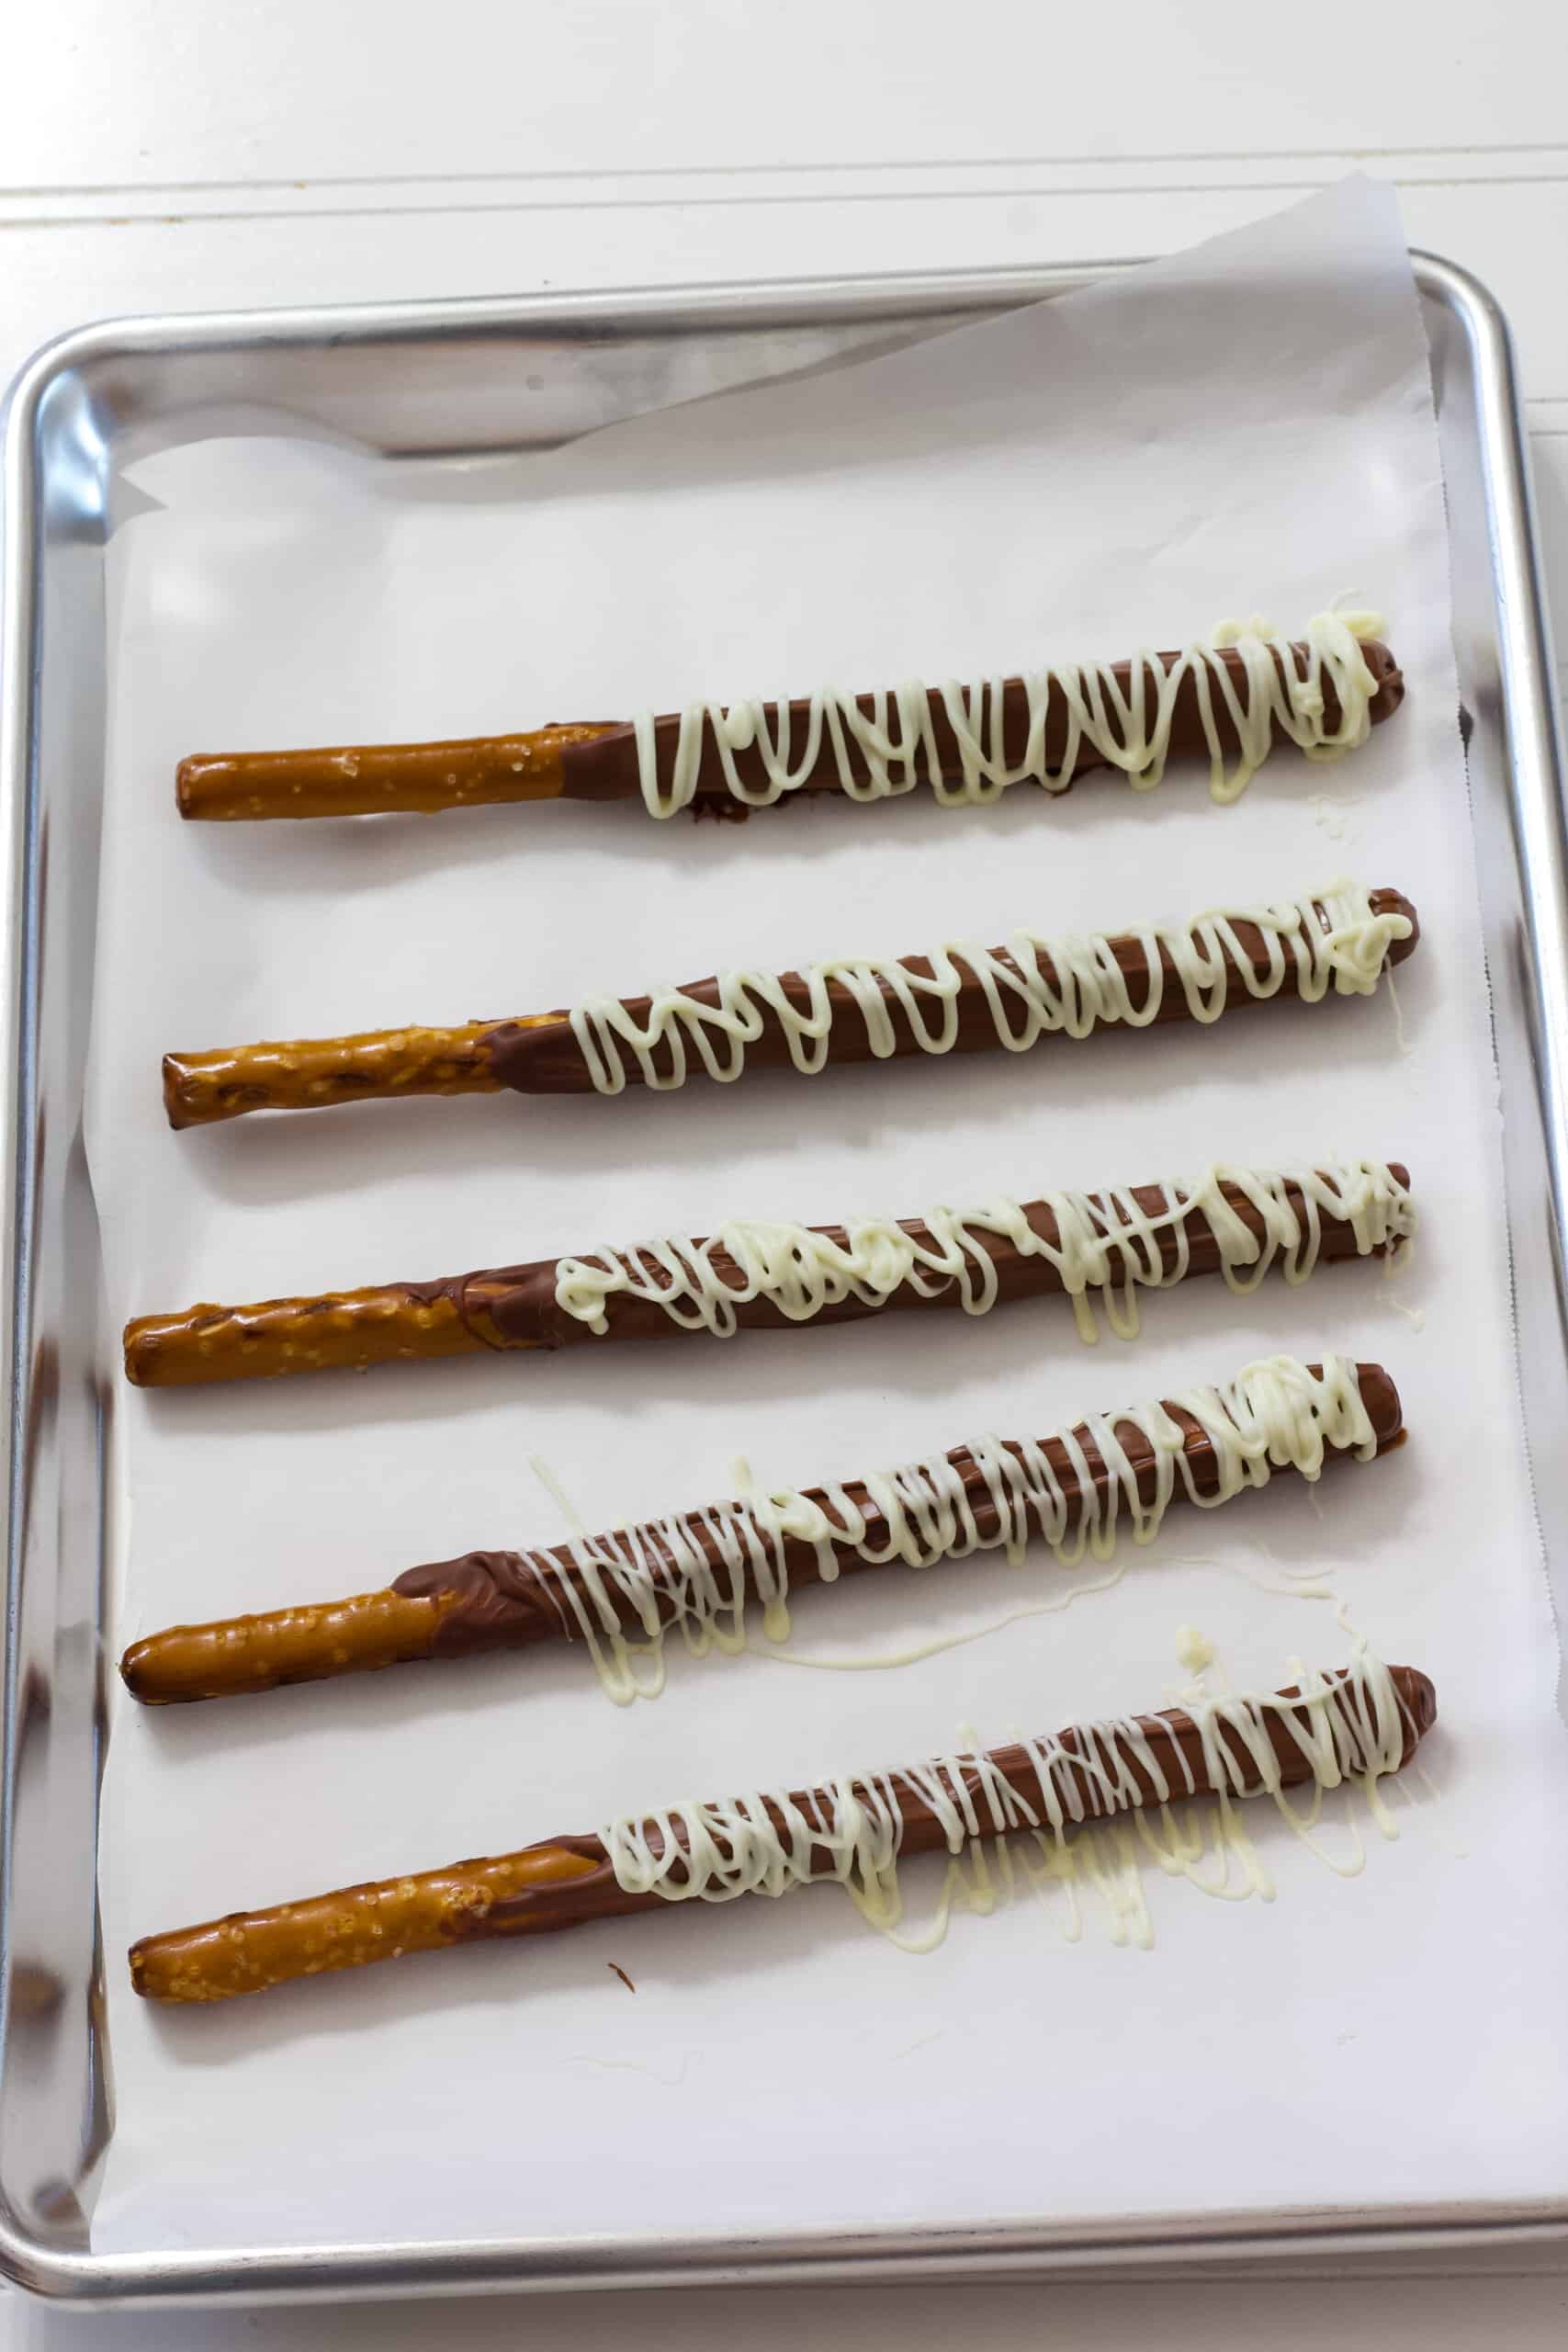 Five pretzel rods that have been dipped in milk chocolate and have a white chocolate drizzle over them. They are laying flat on a silver sheet pan lined with white parchment paper.